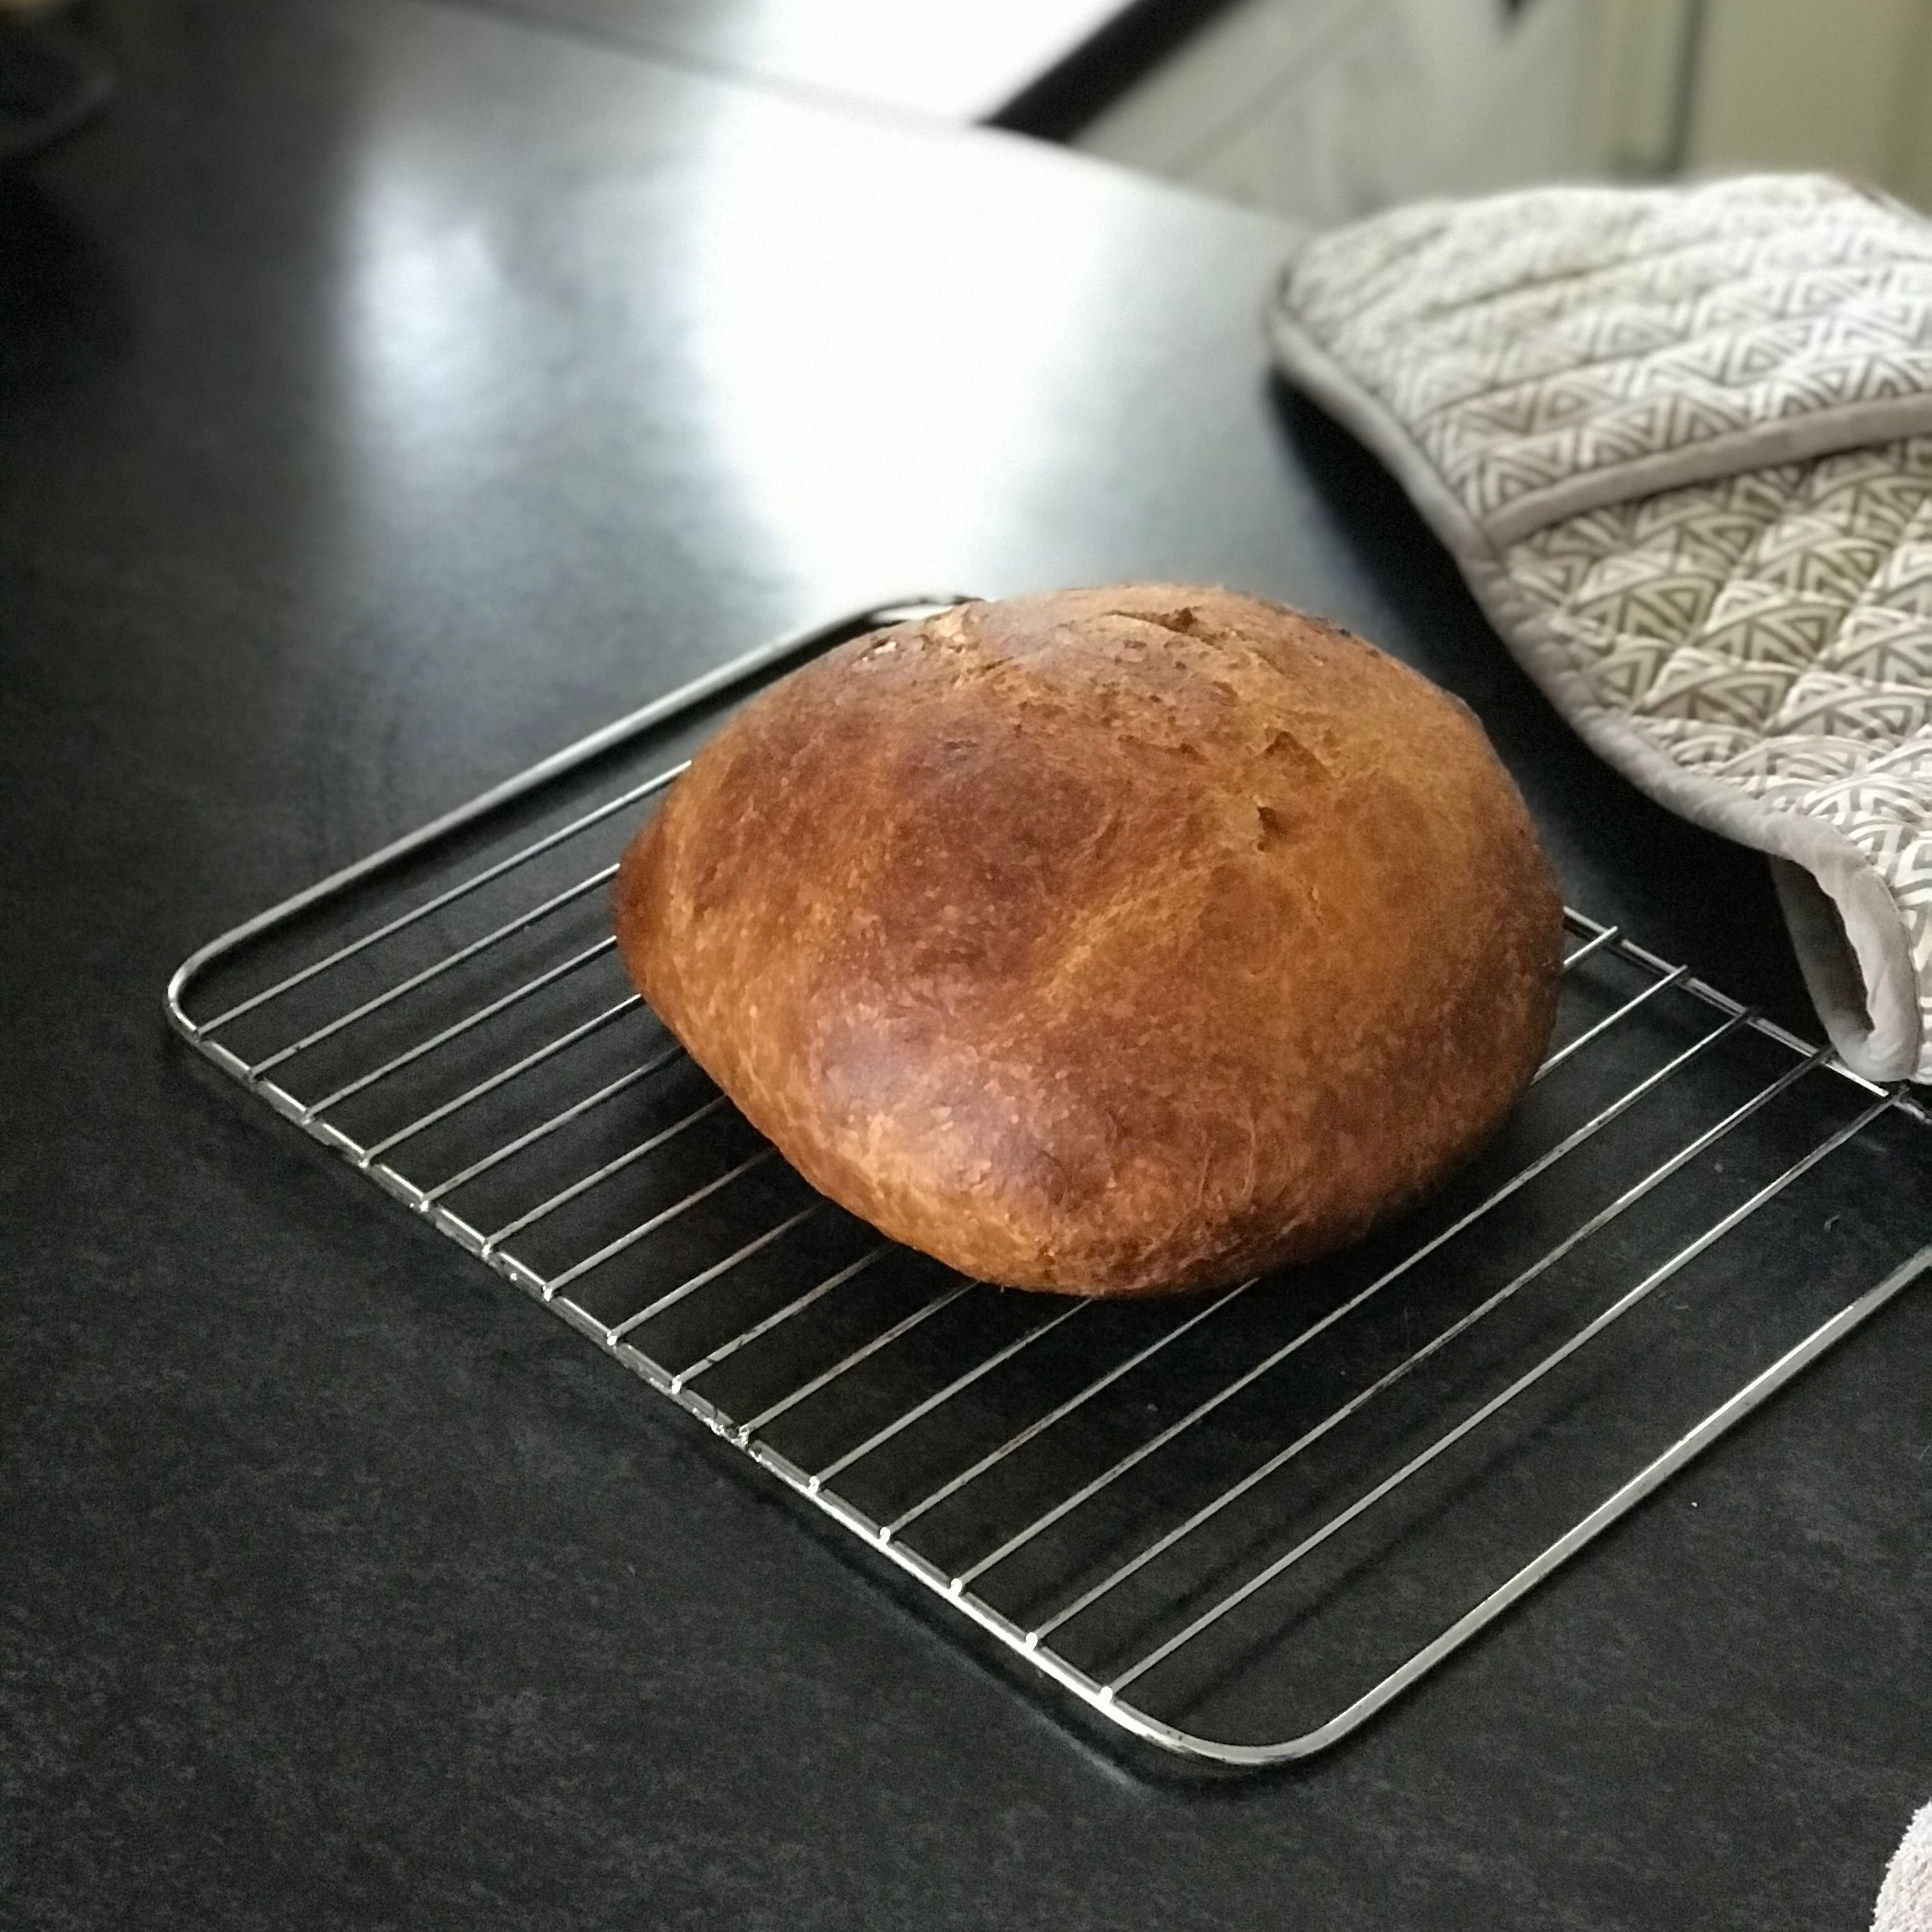 Then when the time is finished take the cast Iron pot out of the oven and put the Bread on a metal rack and live it to cool down for about 30 min. Then you can cut it and enjoy it.